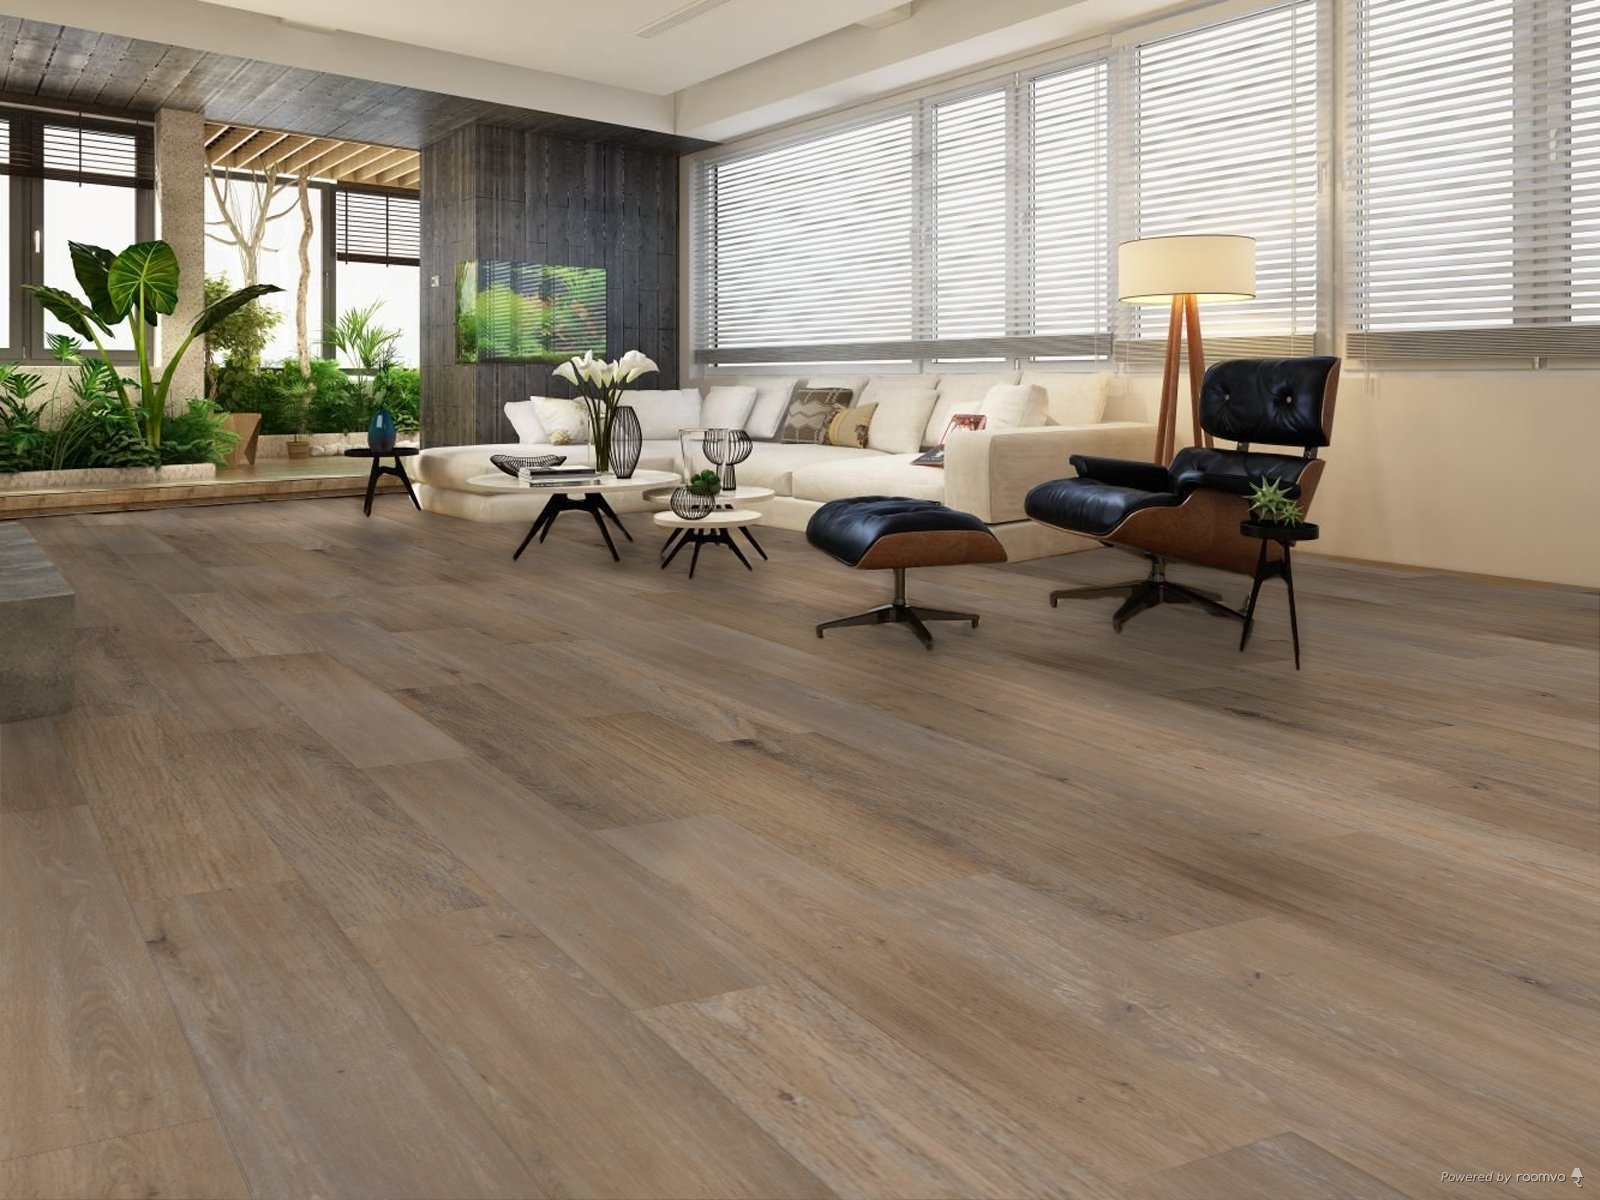 Infinity Collection WPC Flooring Quality Floors 4 Less